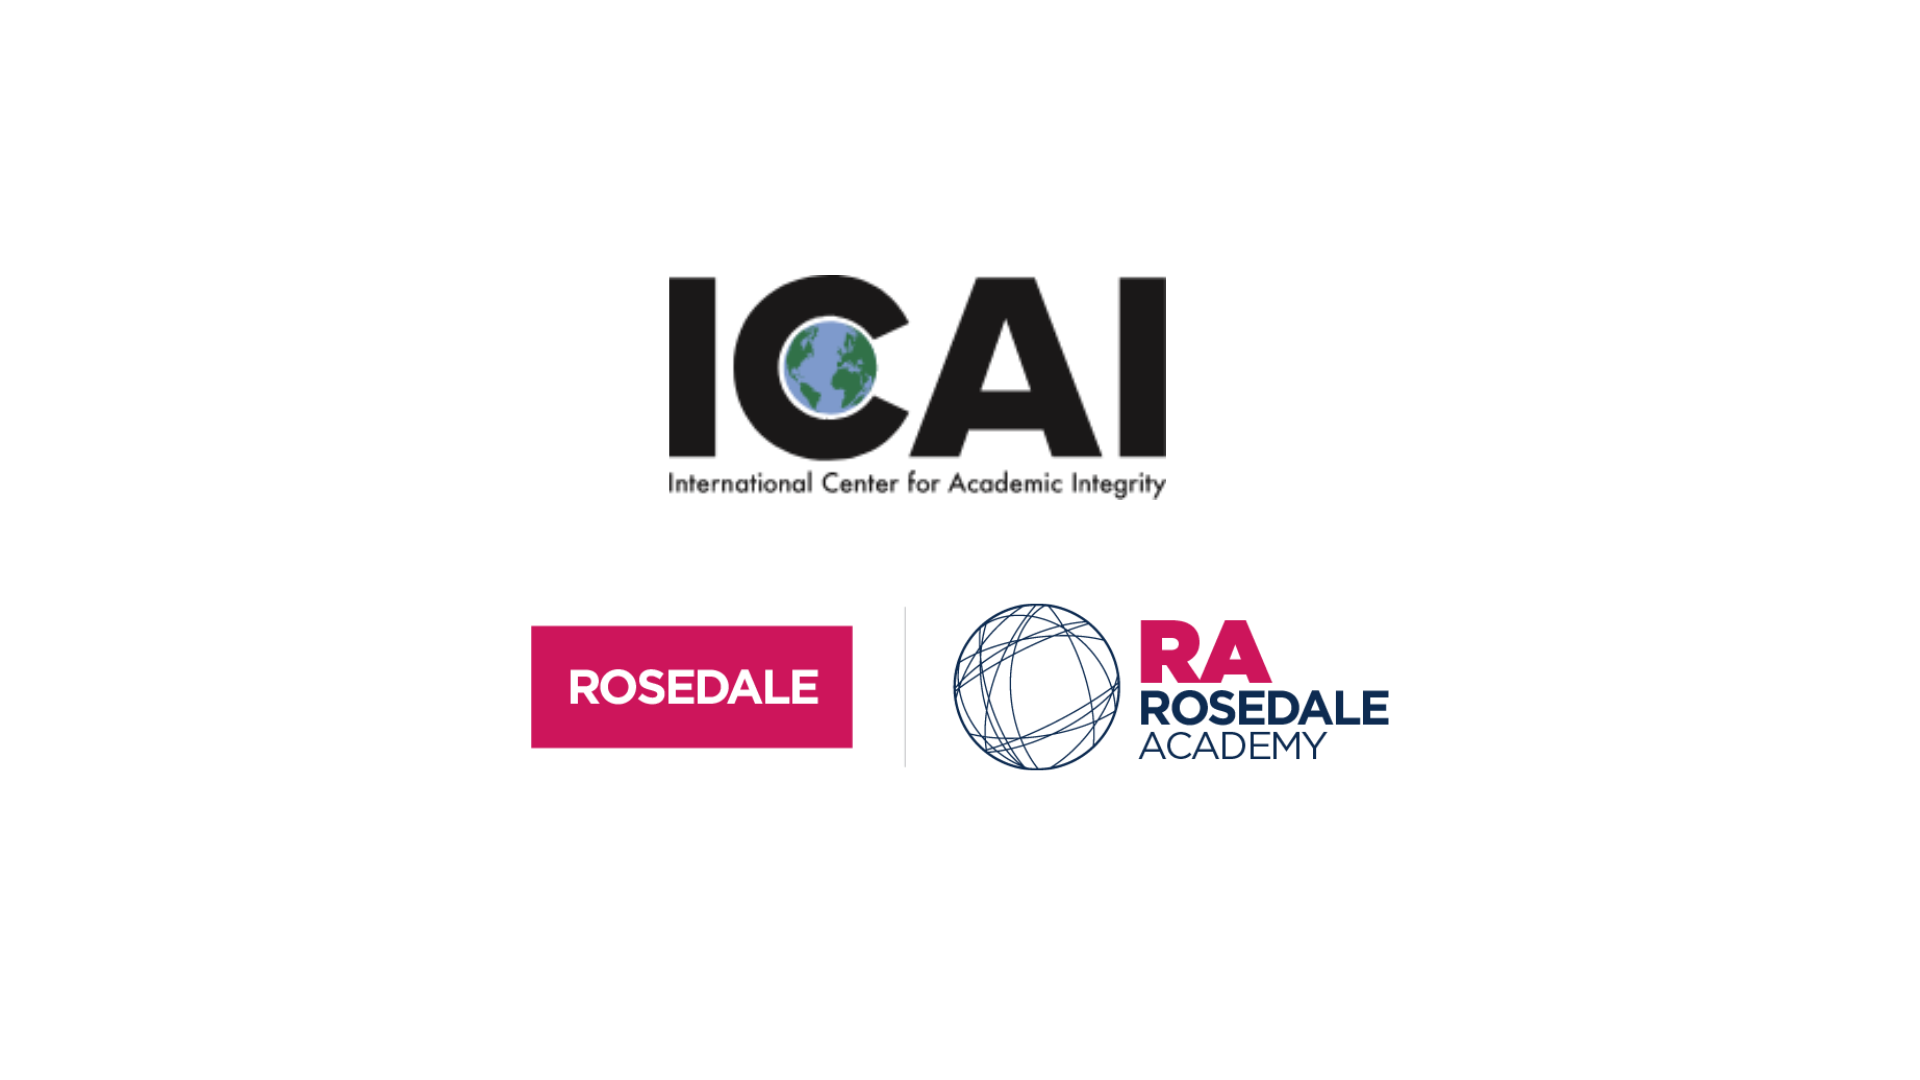 Rosedale is a Member of the International Centre for Academic Integrity